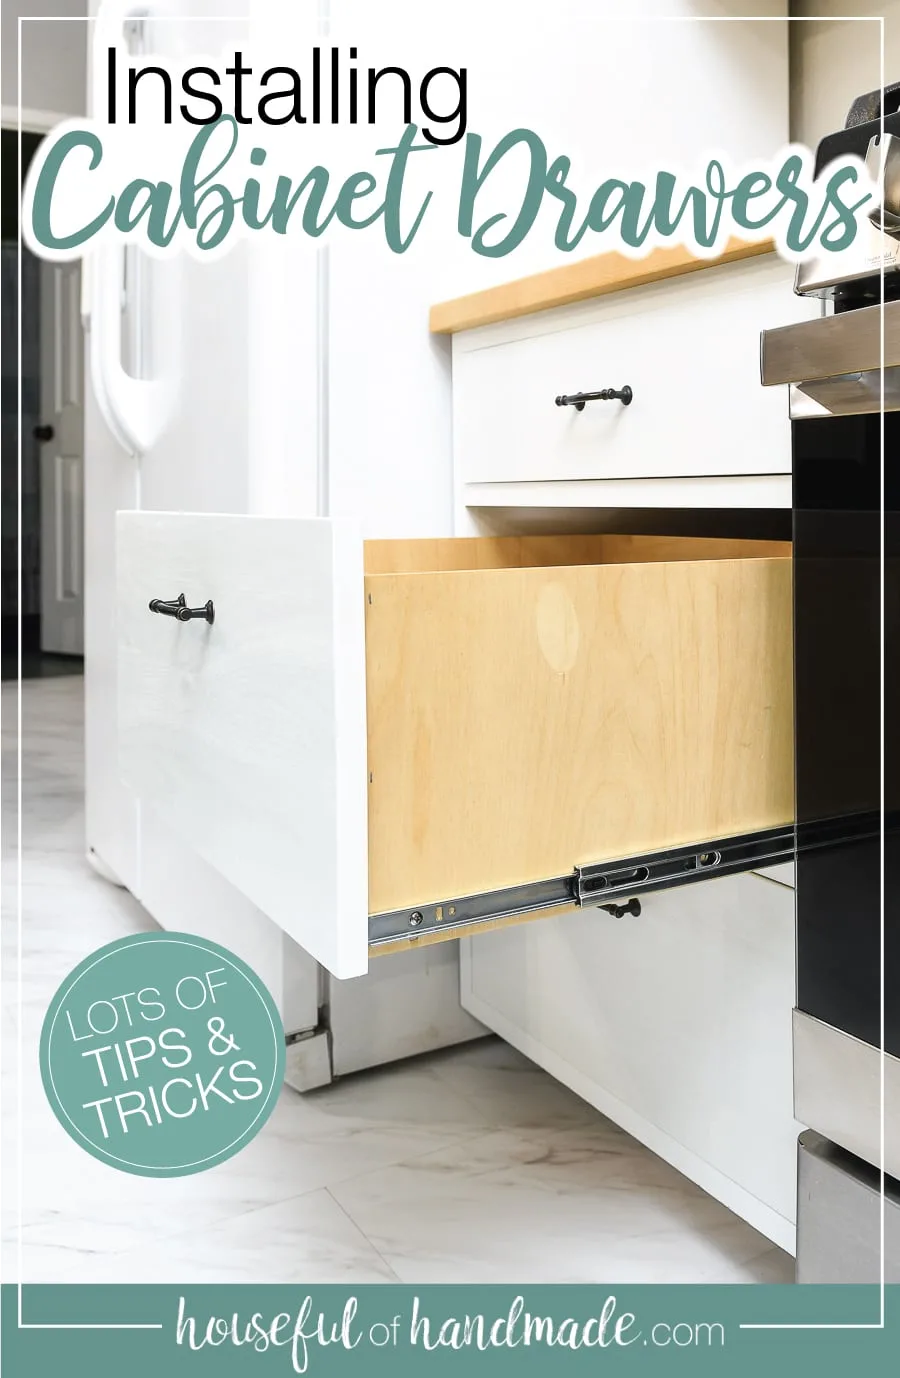 How To Install Cabinet Drawers With, How To Build Cabinet Drawers With Slides